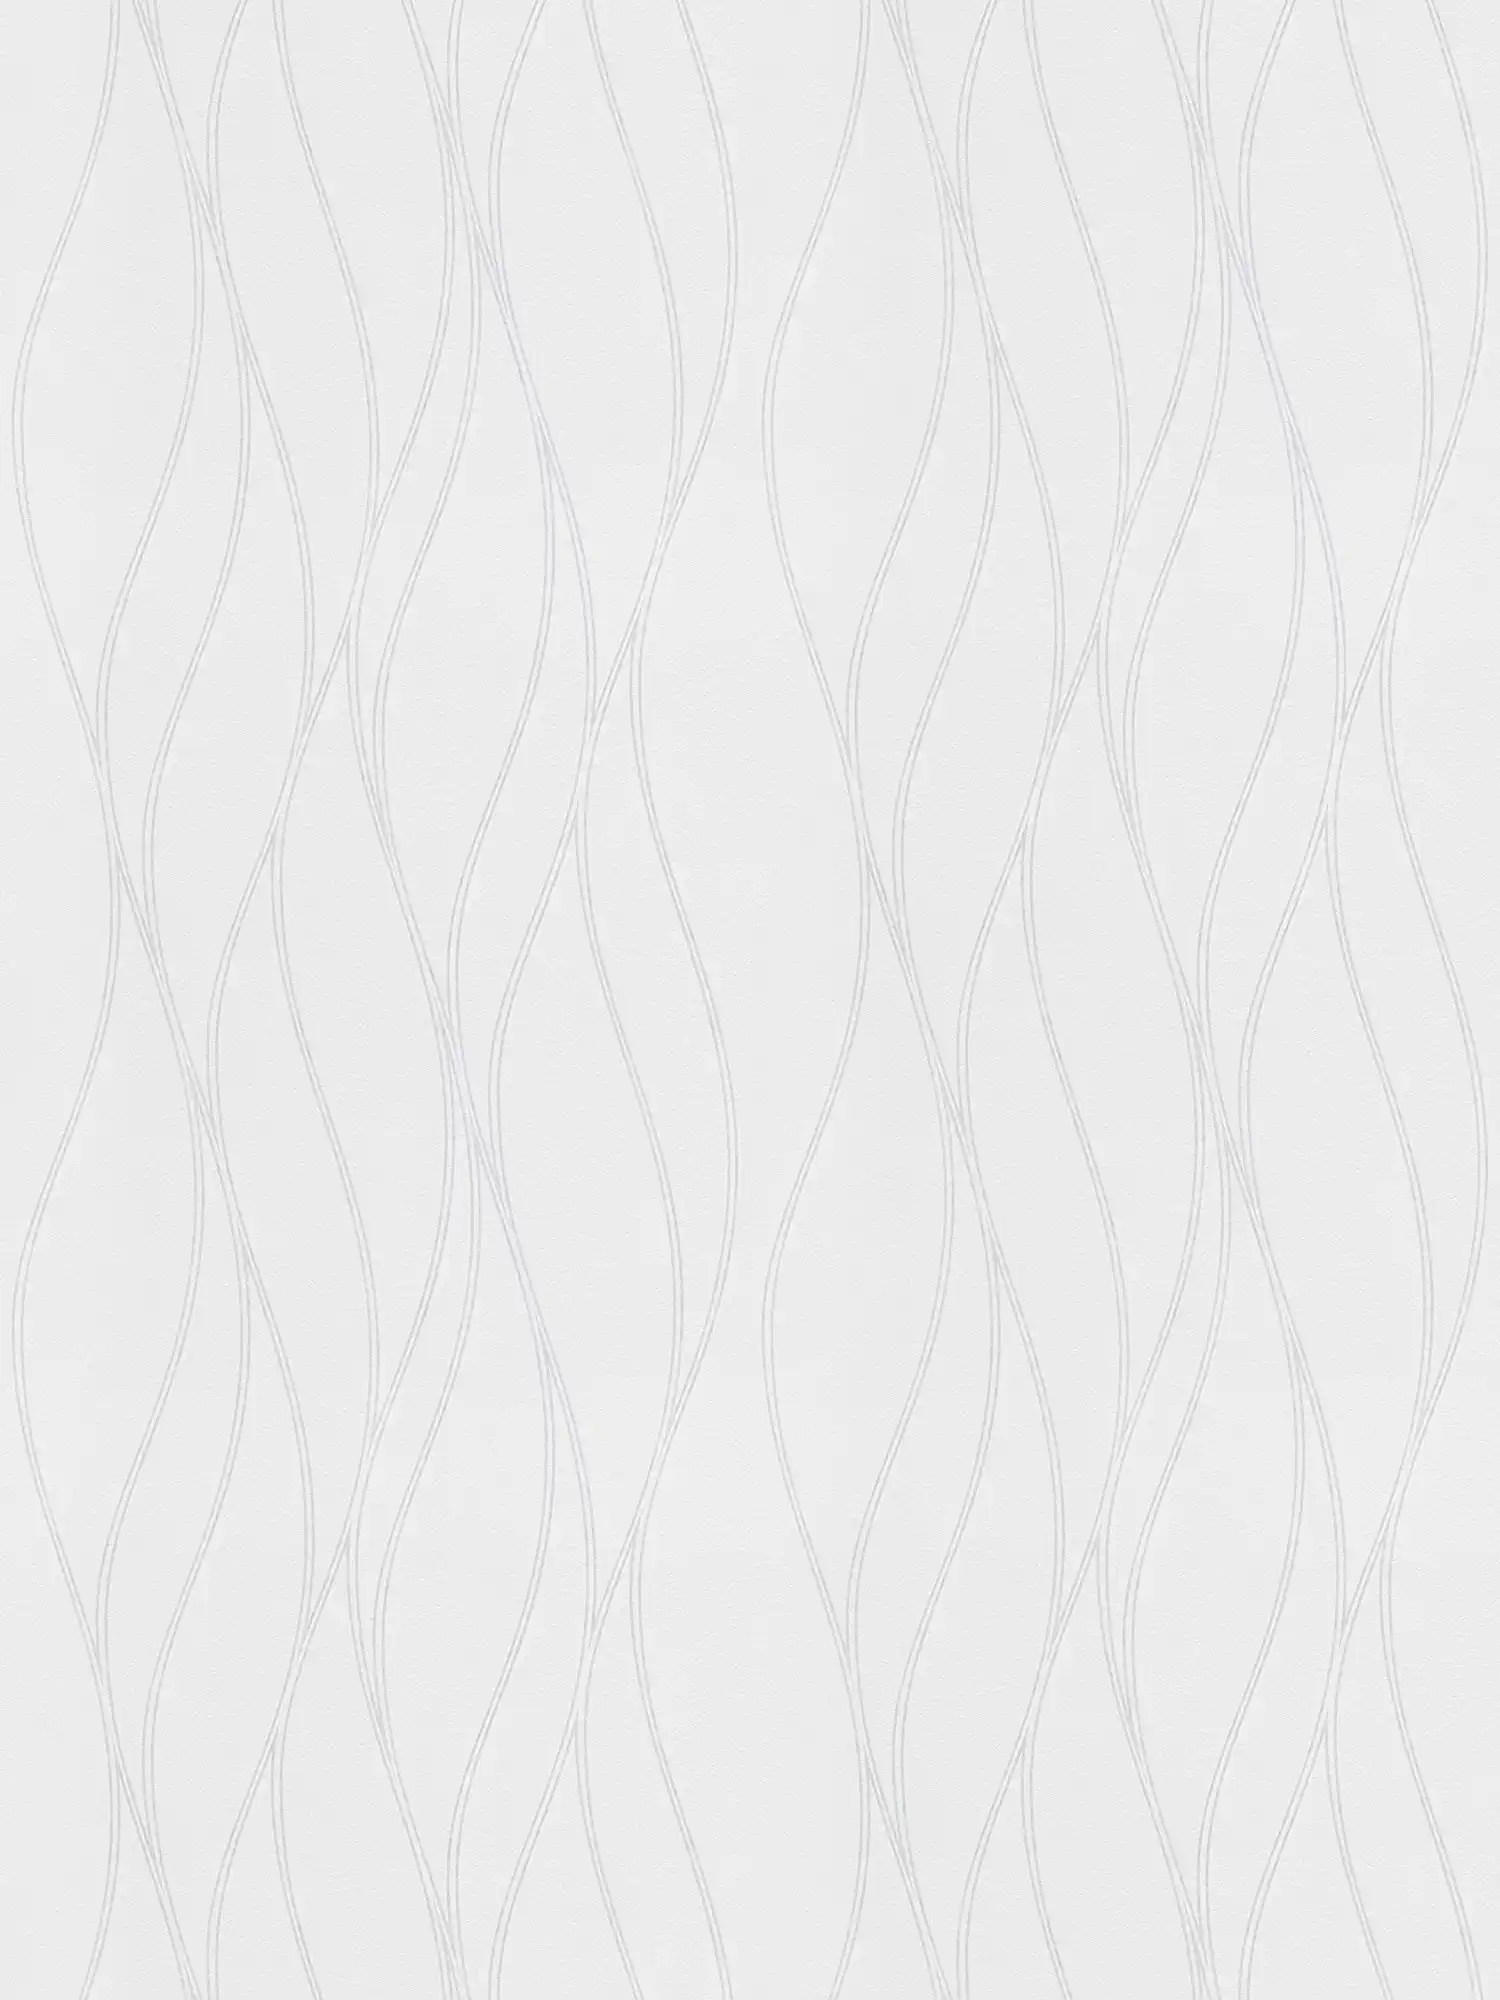 Non-woven wallpaper light grey with wavy lines patterns
